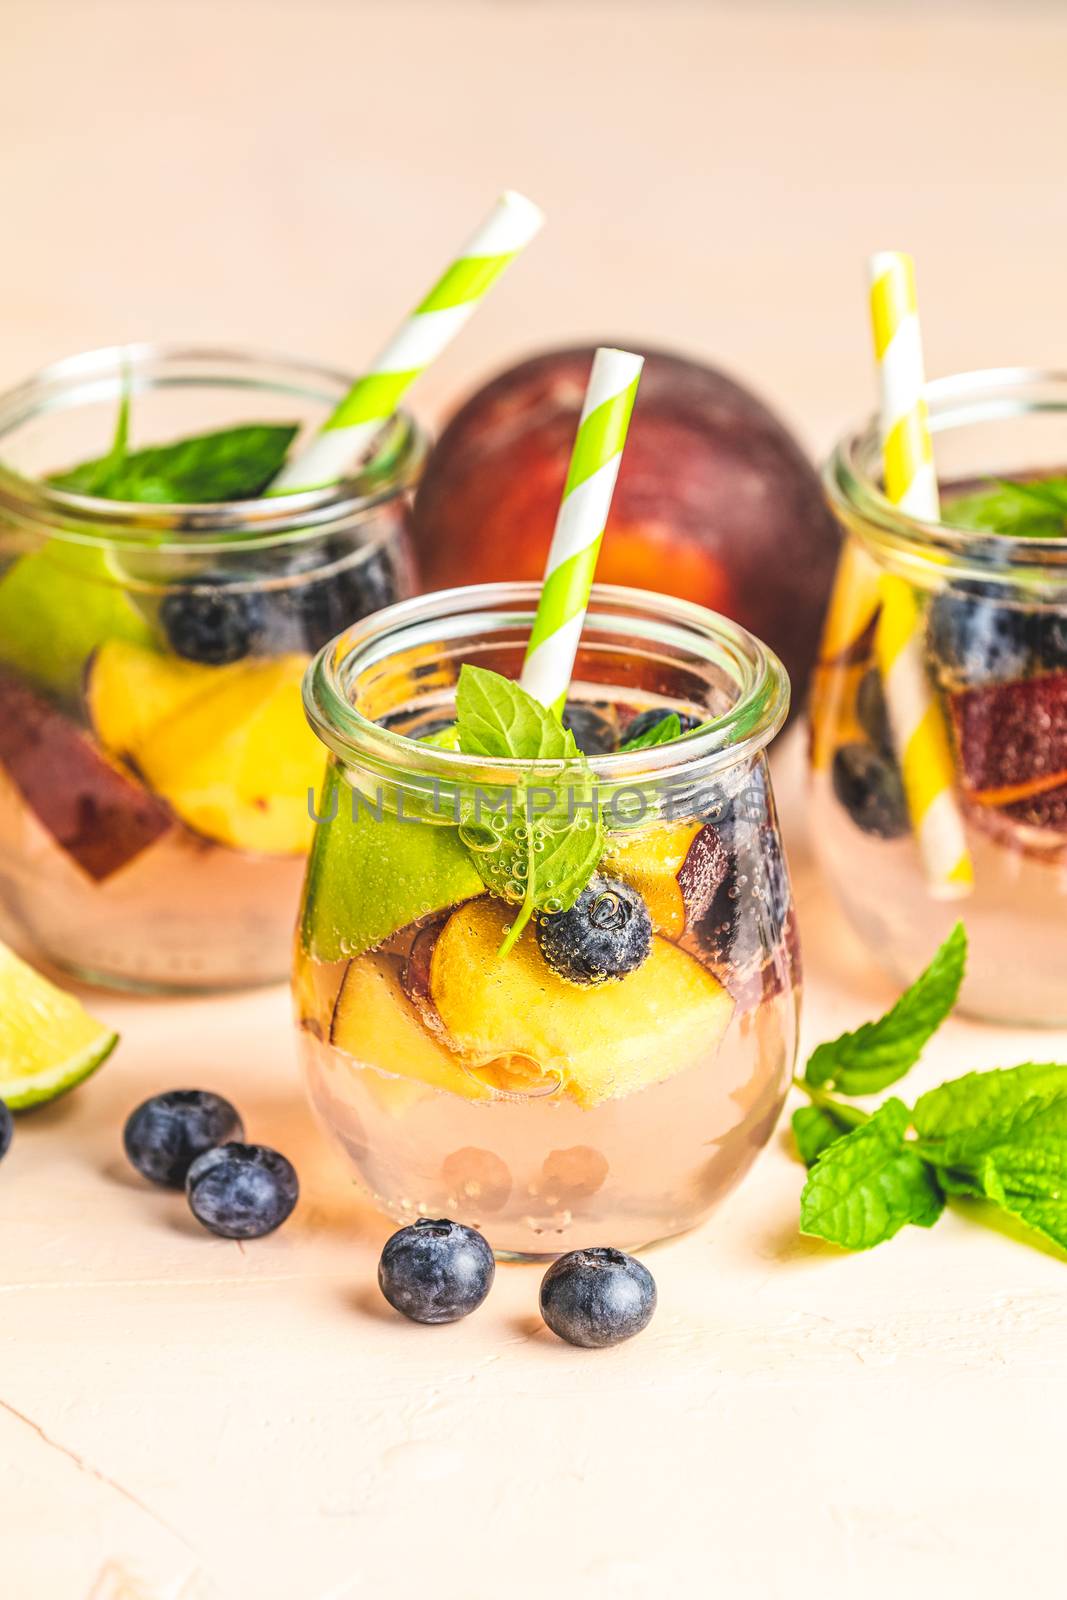 Blueberry and peach infused water, cocktail, lemonade or tea. Summer iced cold drink with blueberry, lime, peach and mint. Selective focus